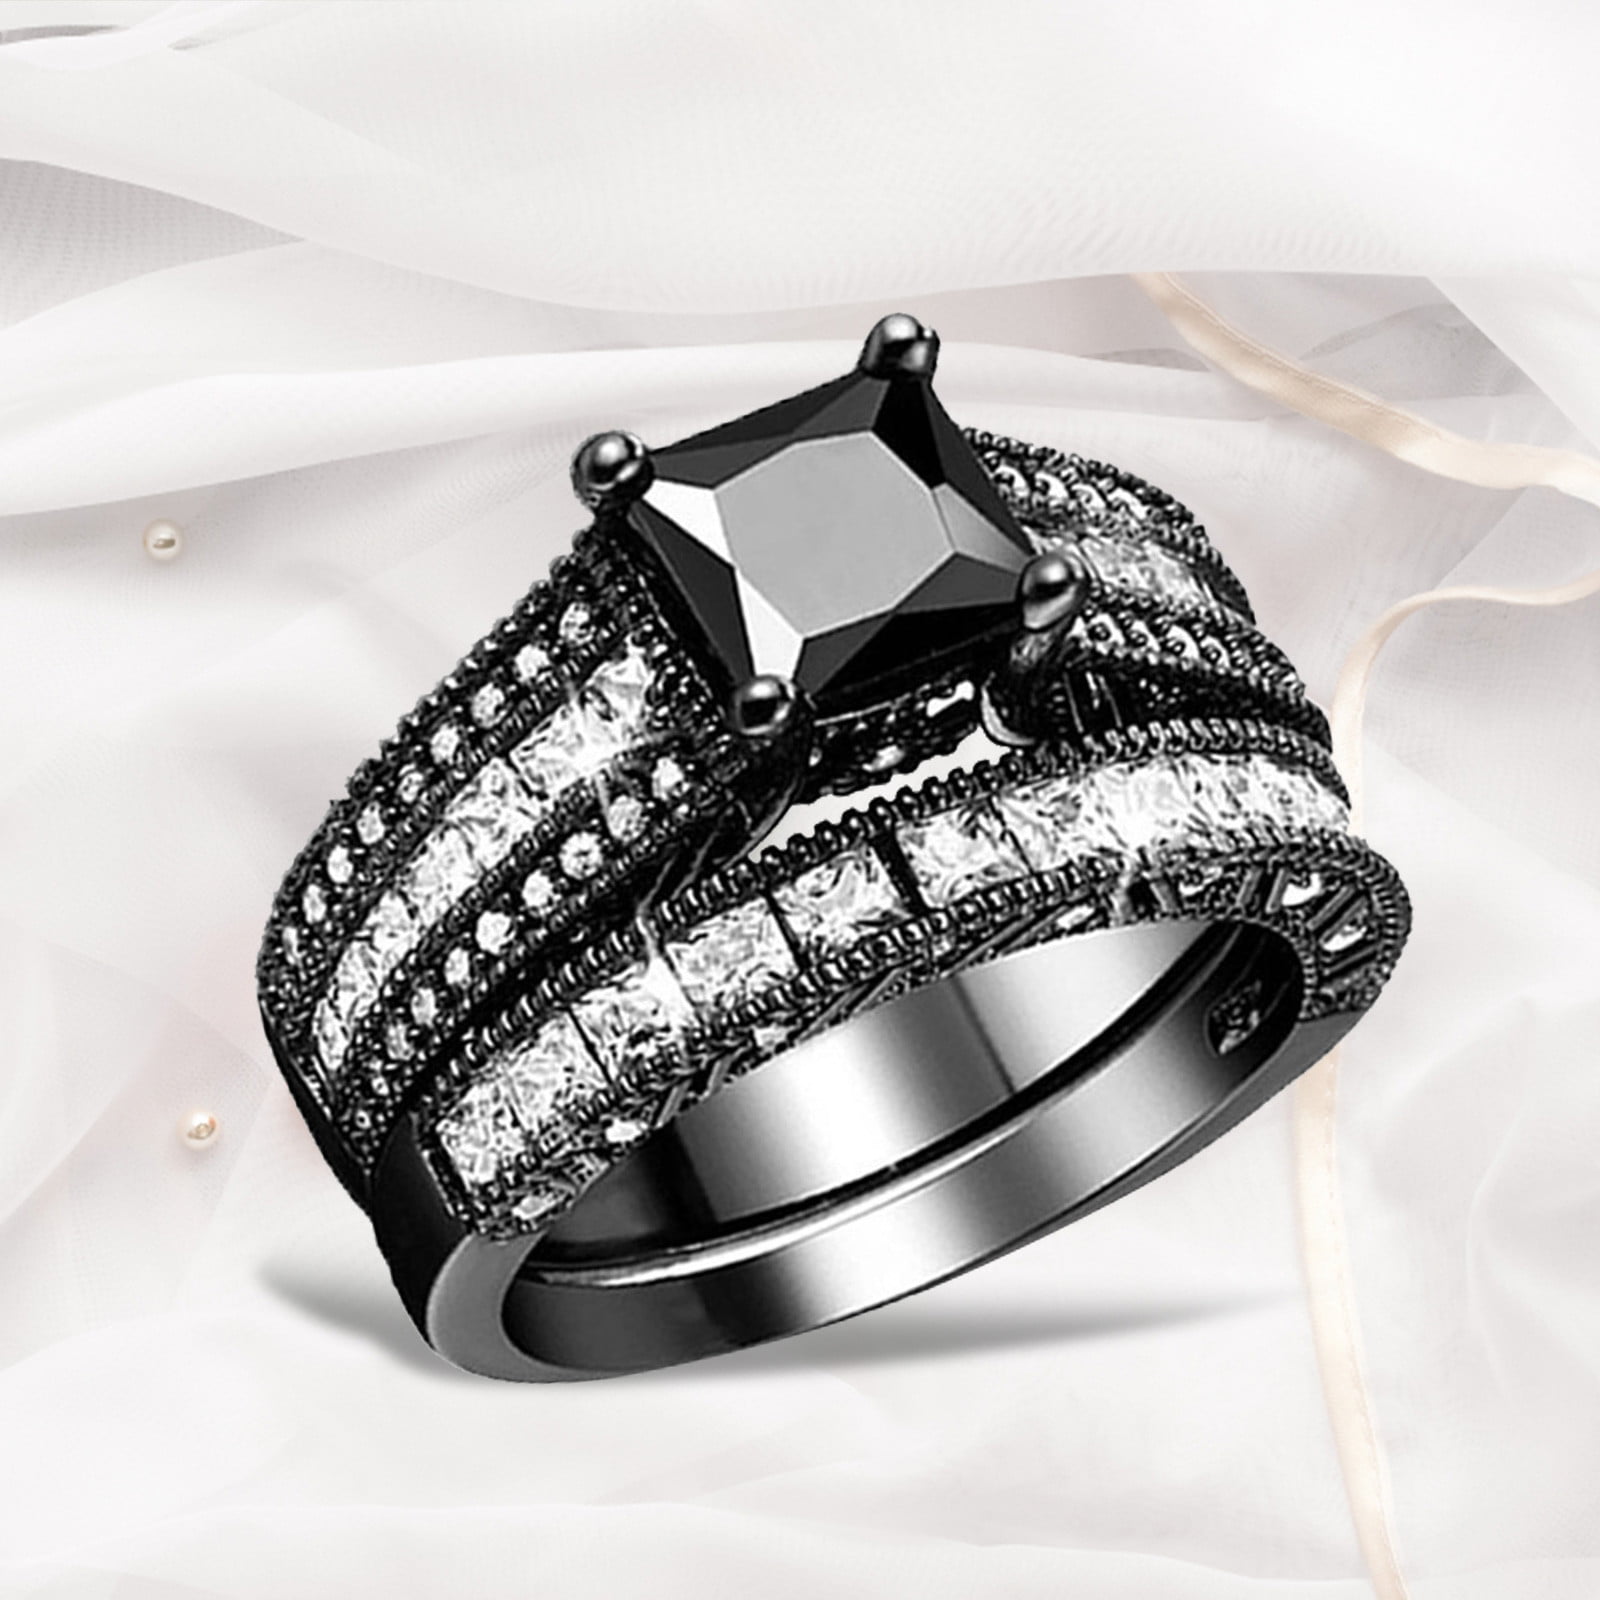 Black Diamonds - What Are They & Are They Real? - FAQ | Leibish